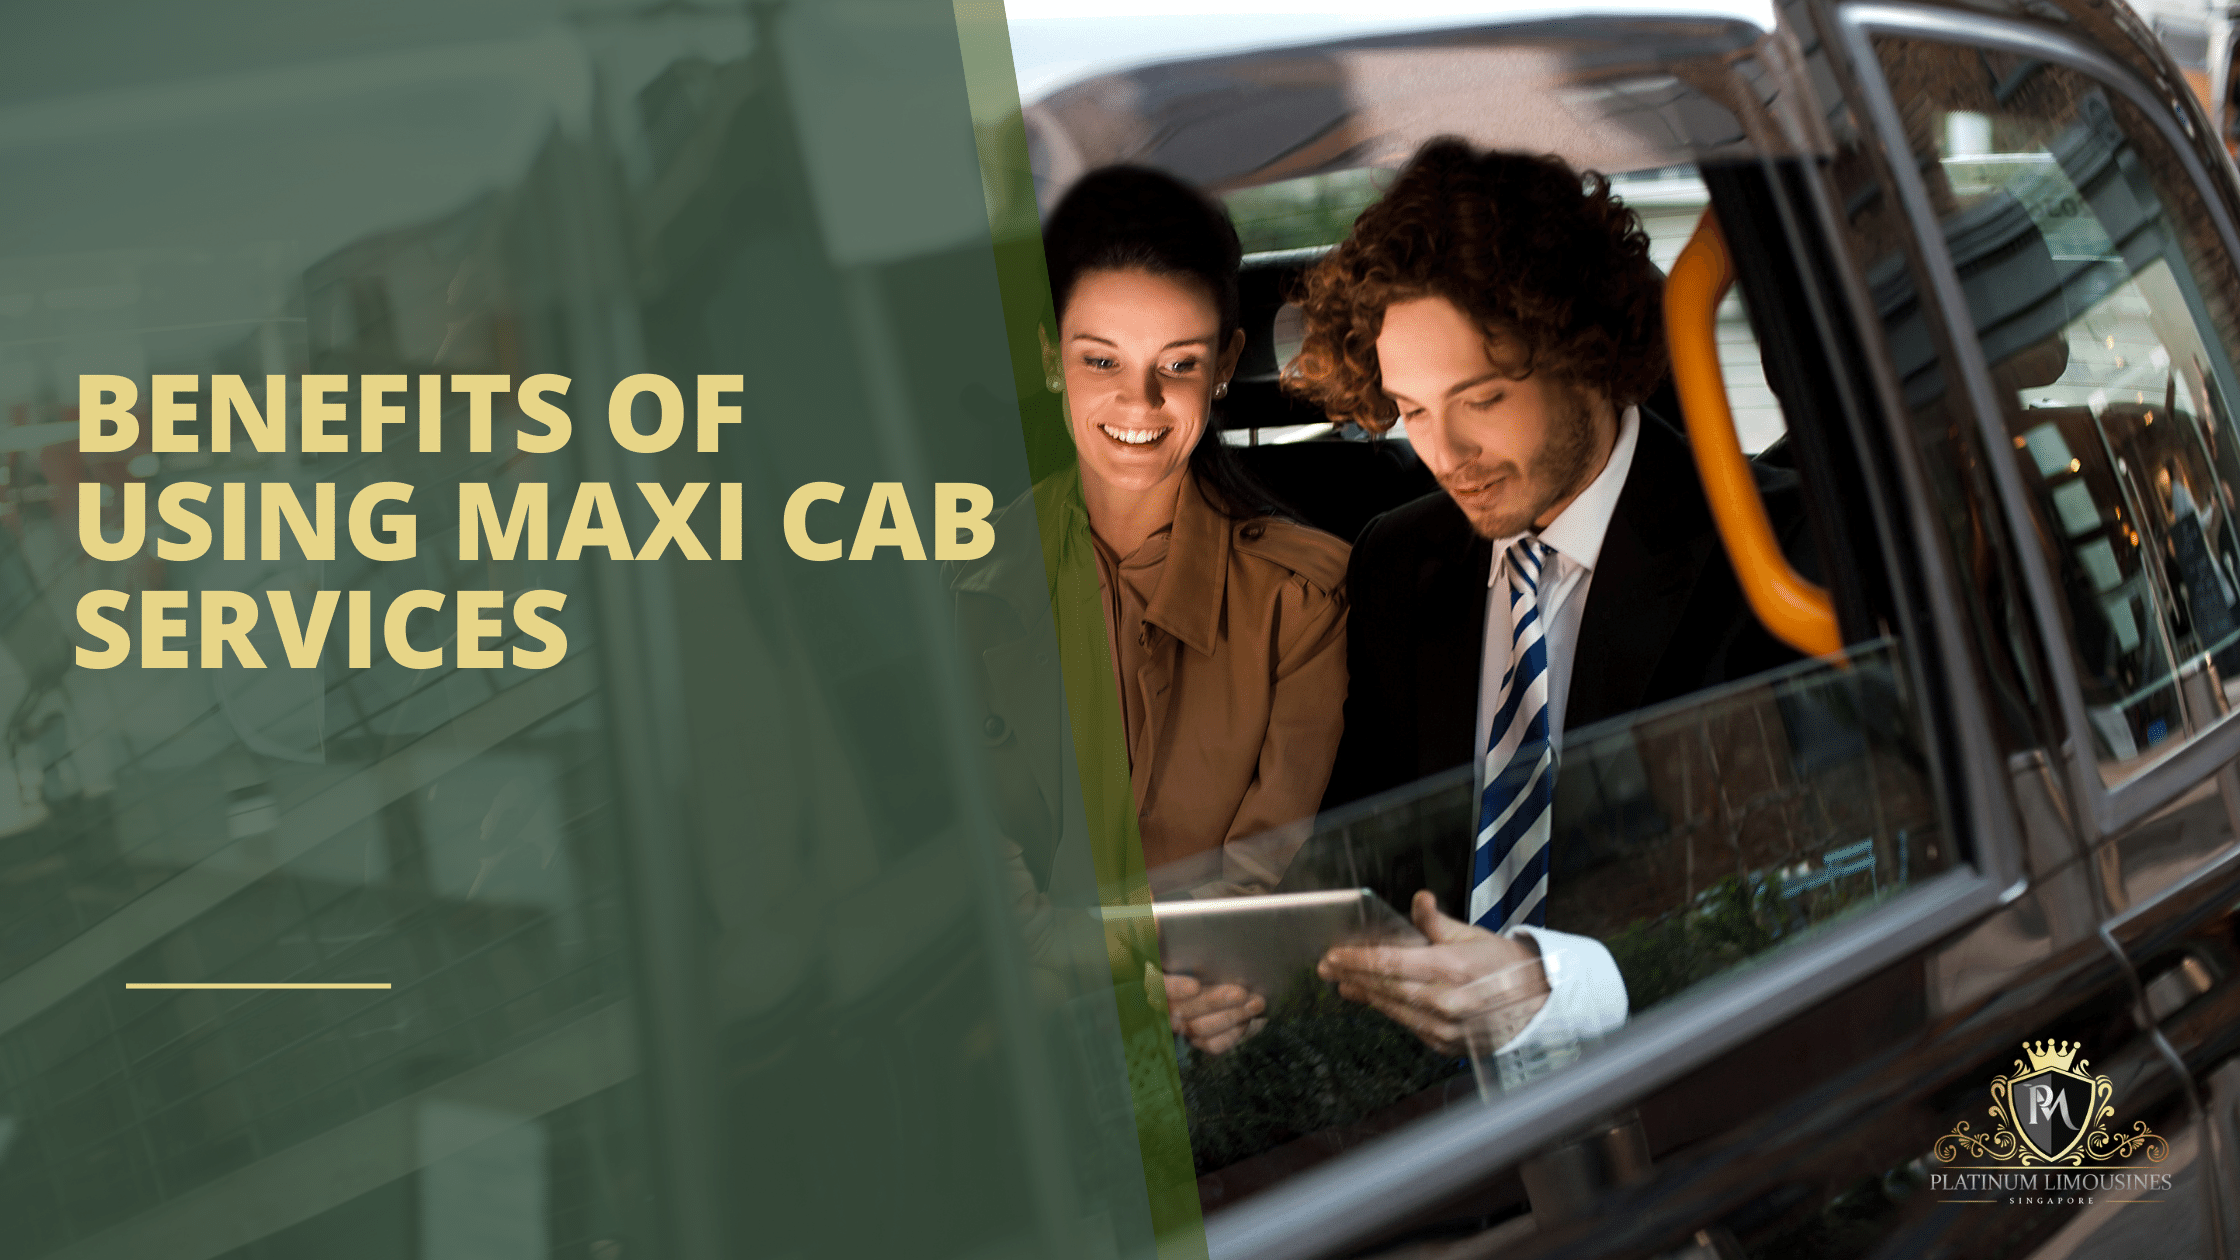 Benefits of Using Maxi Cab Services